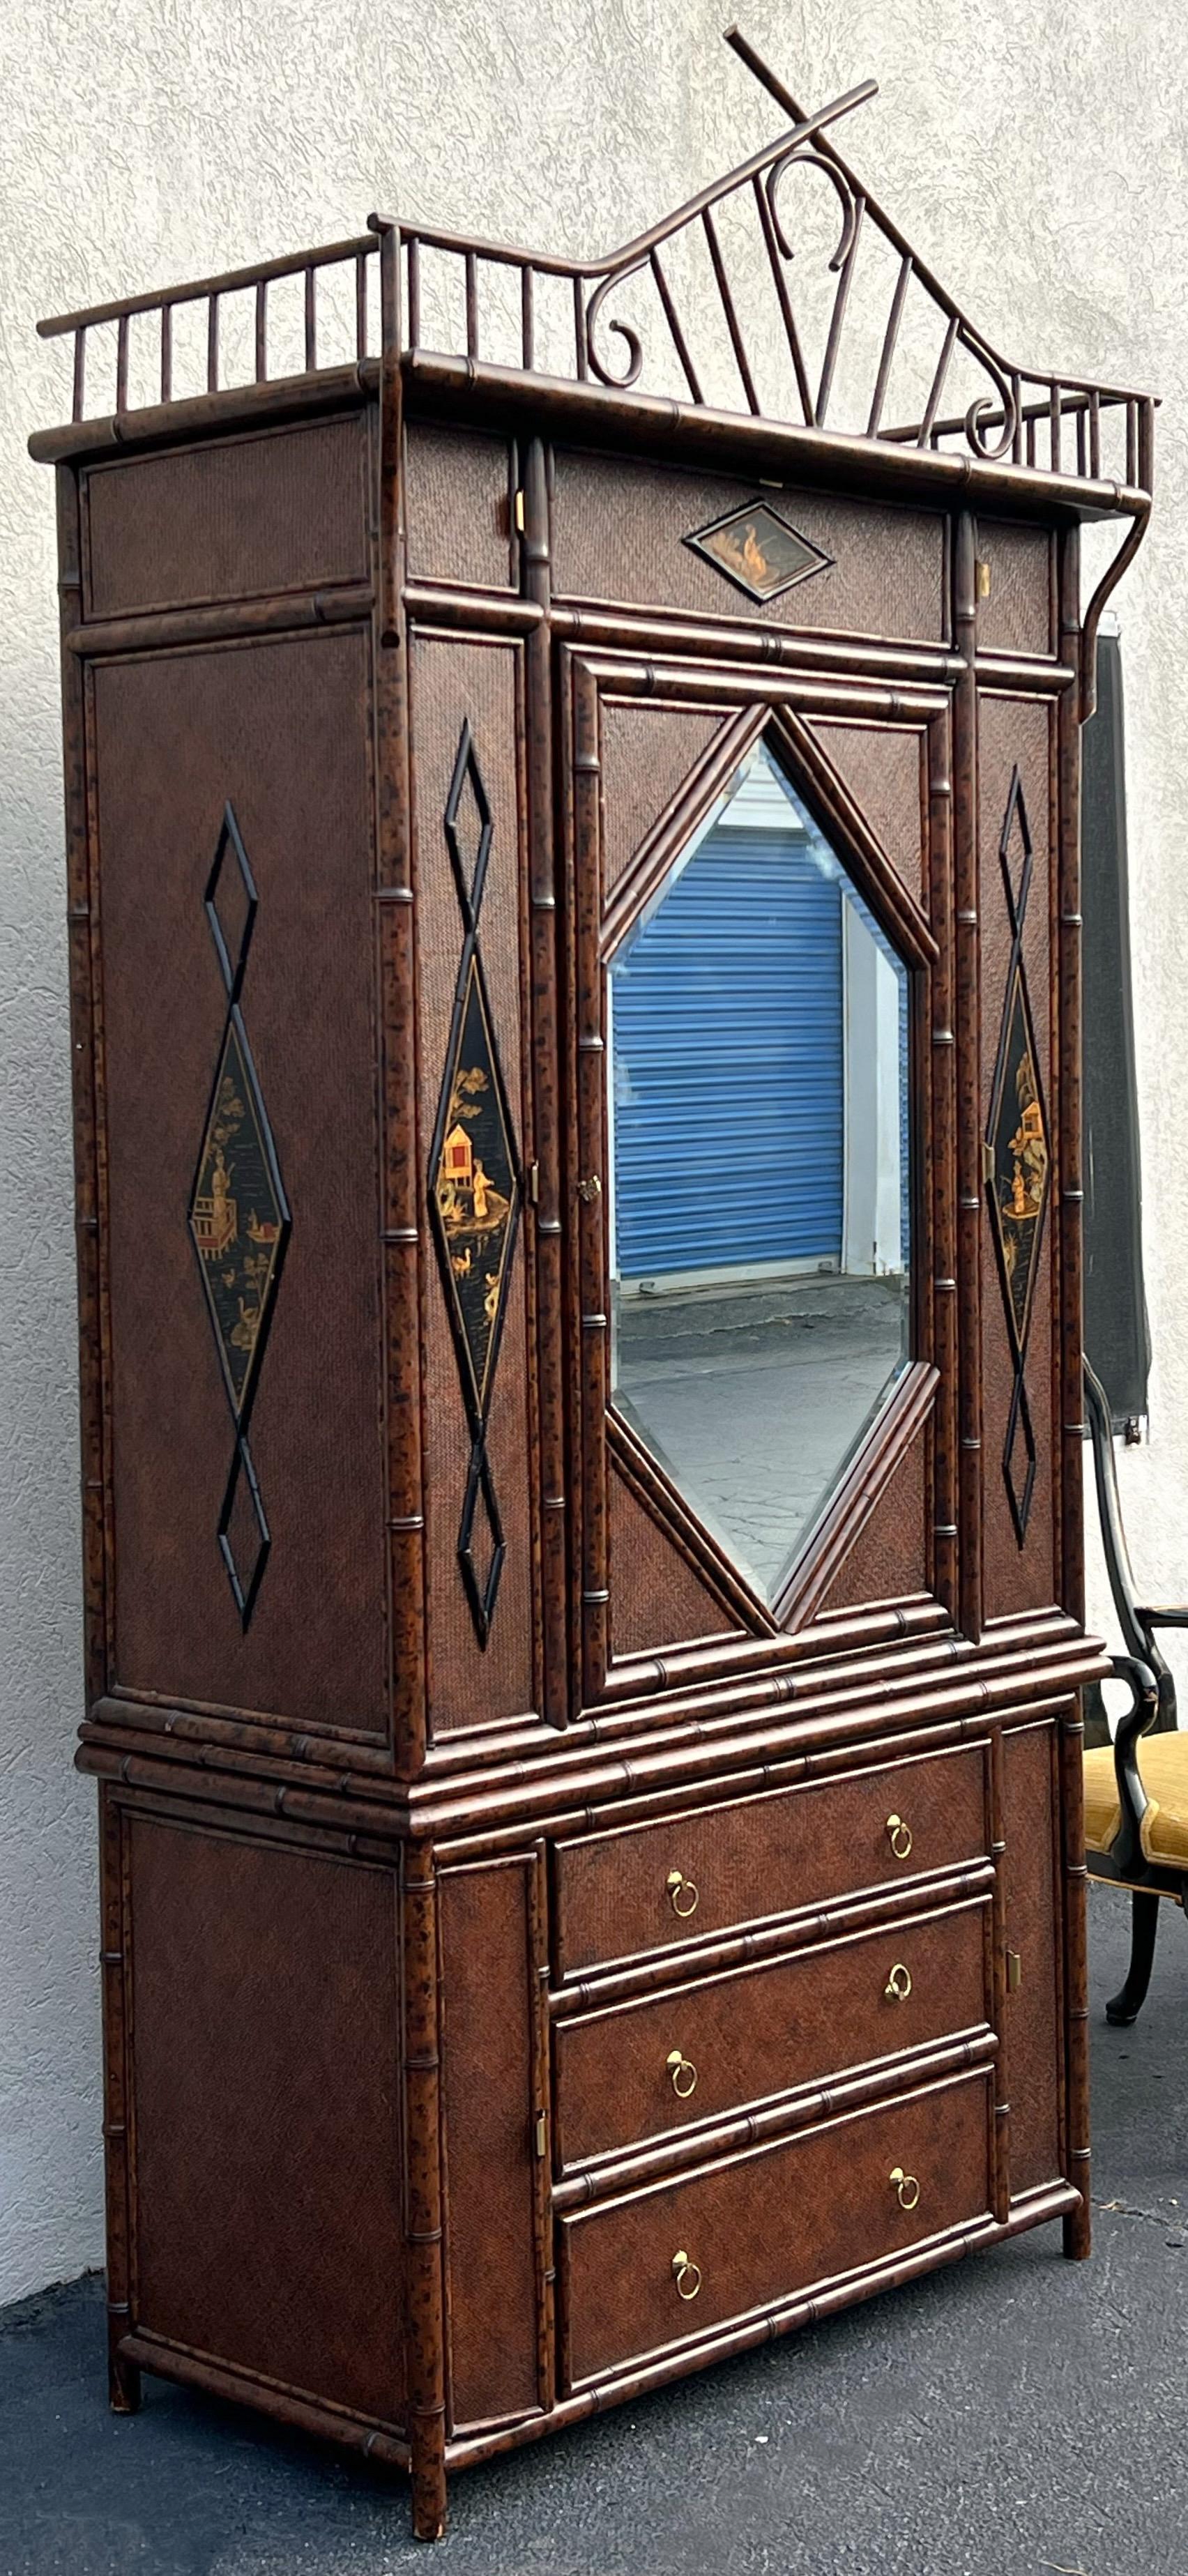 This is a large scale Maitland-Smith faux burnt bamboo armoire. This has English styling with its lacquered chinoiserie painted panels. The armoire has quite a bit of storage options too. It is in very good condition. 

This may require extra